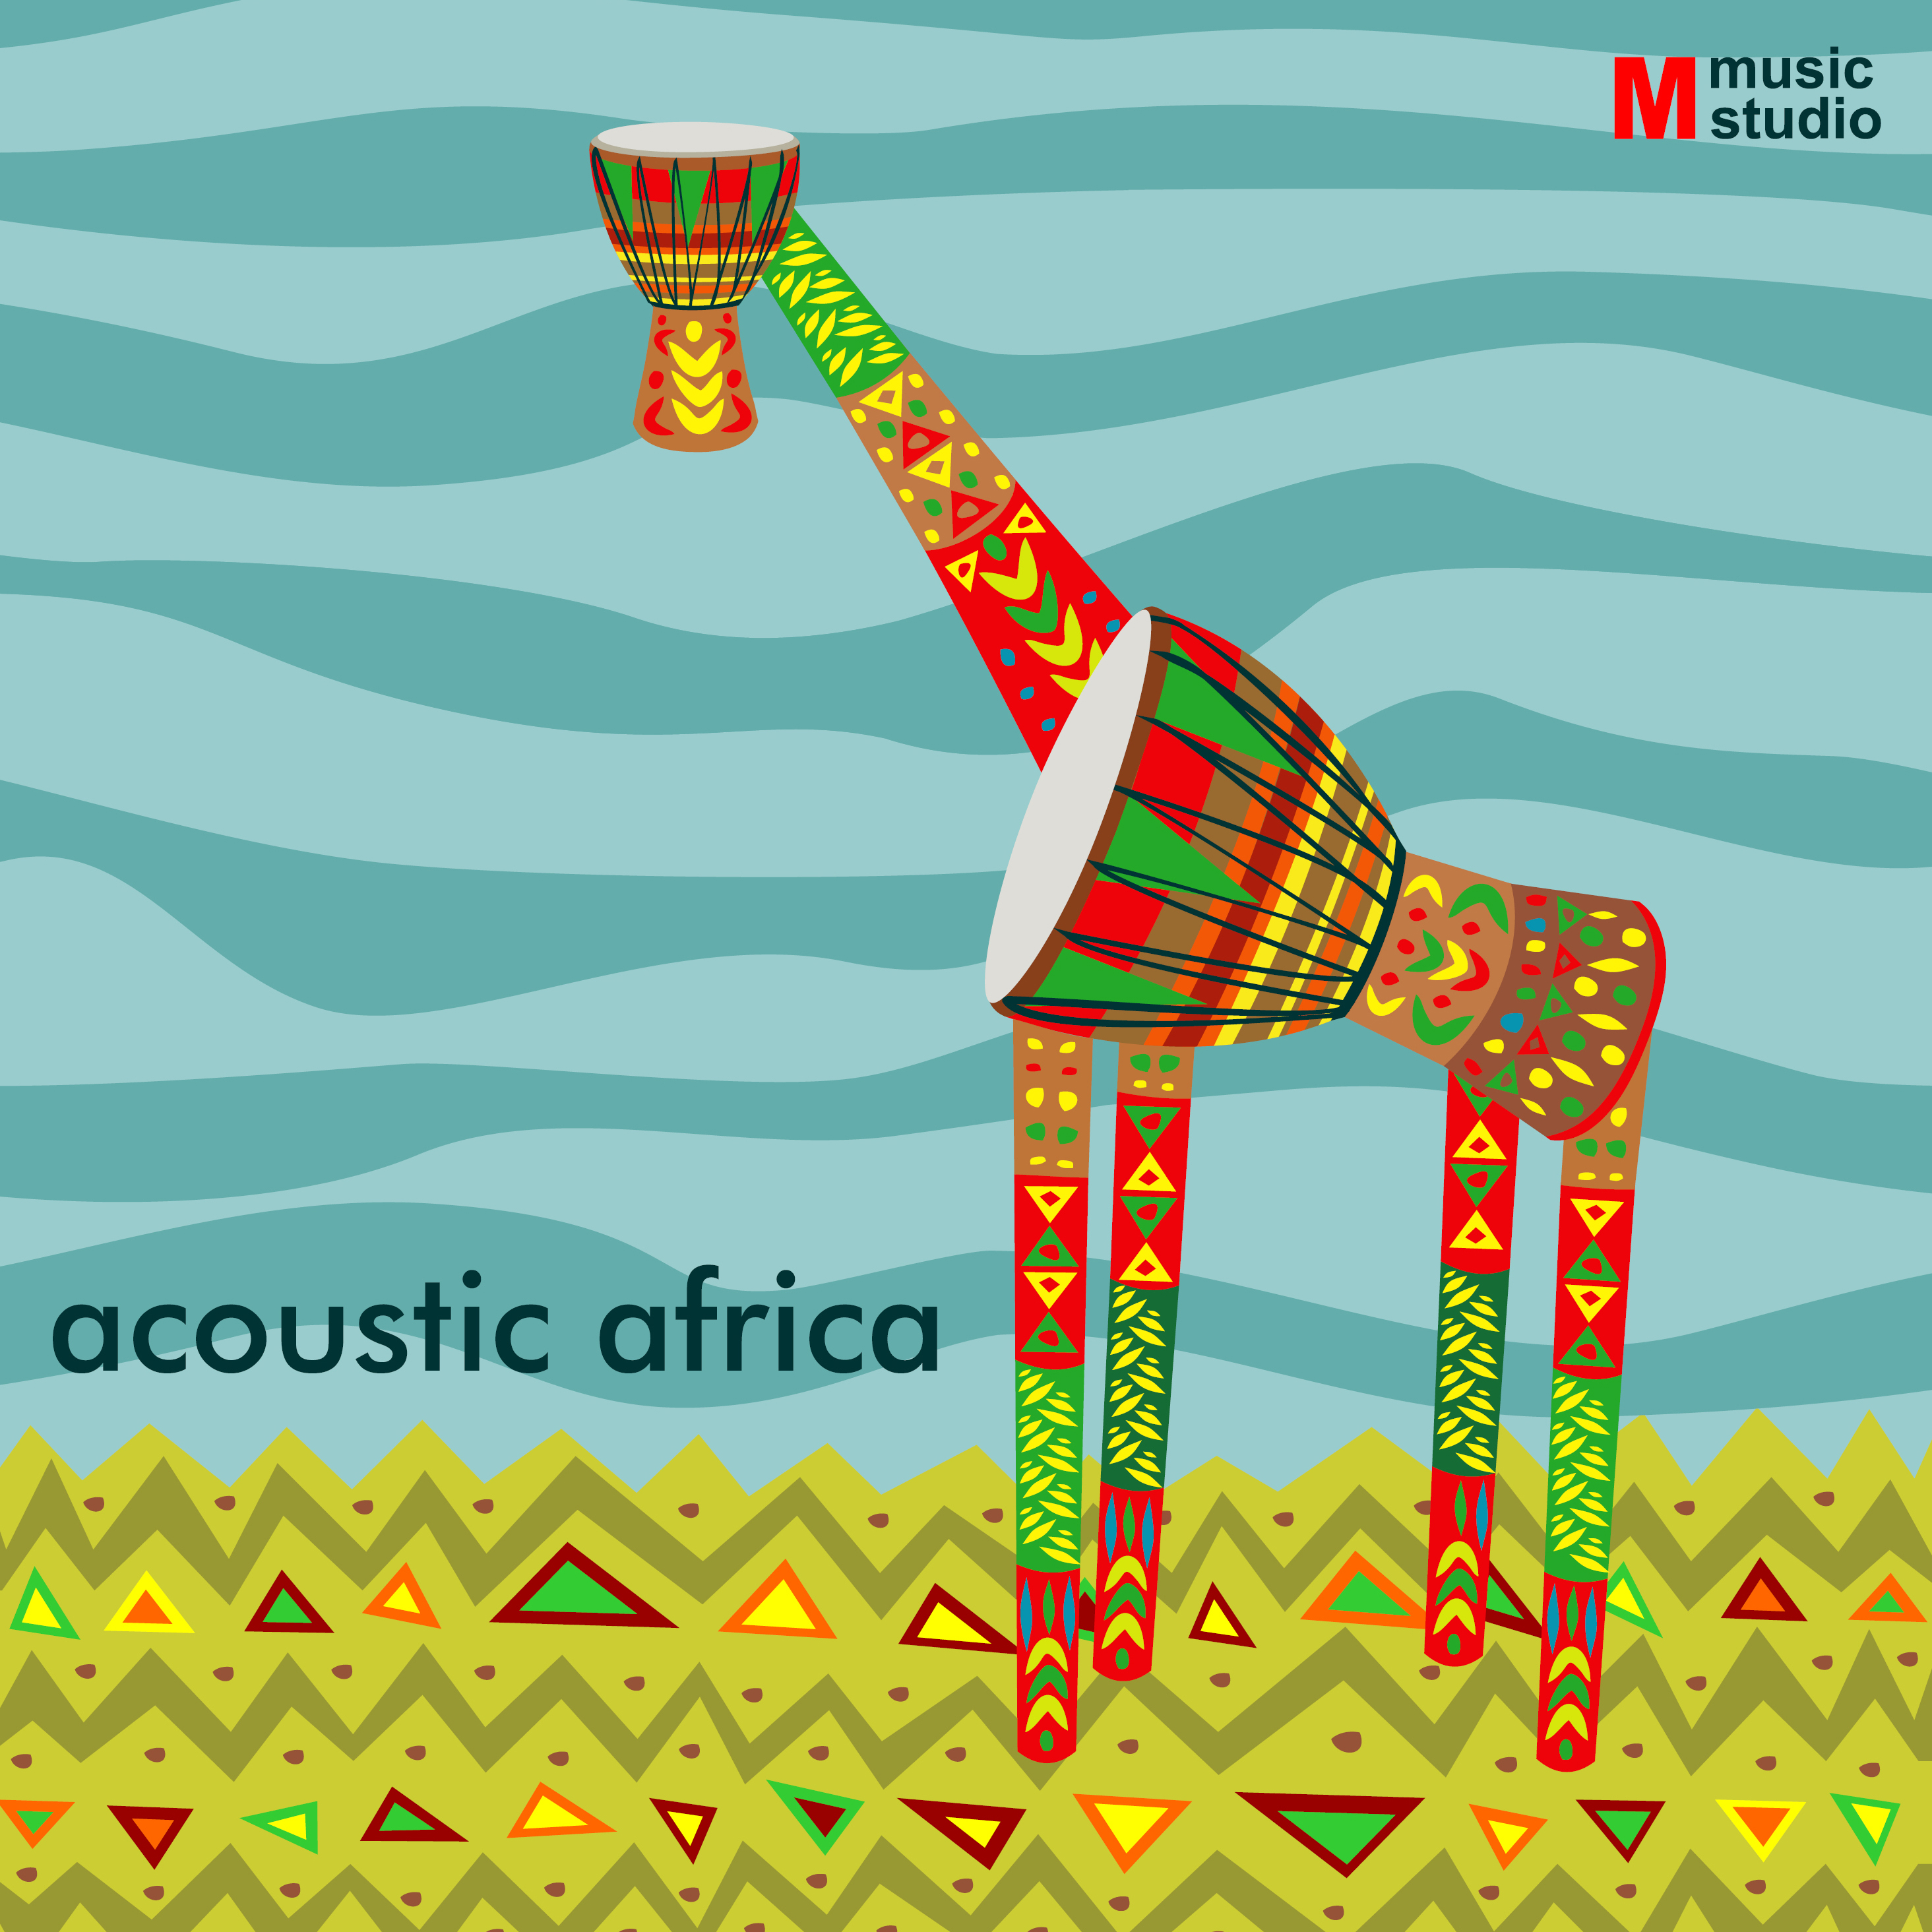 Acoustic Africa